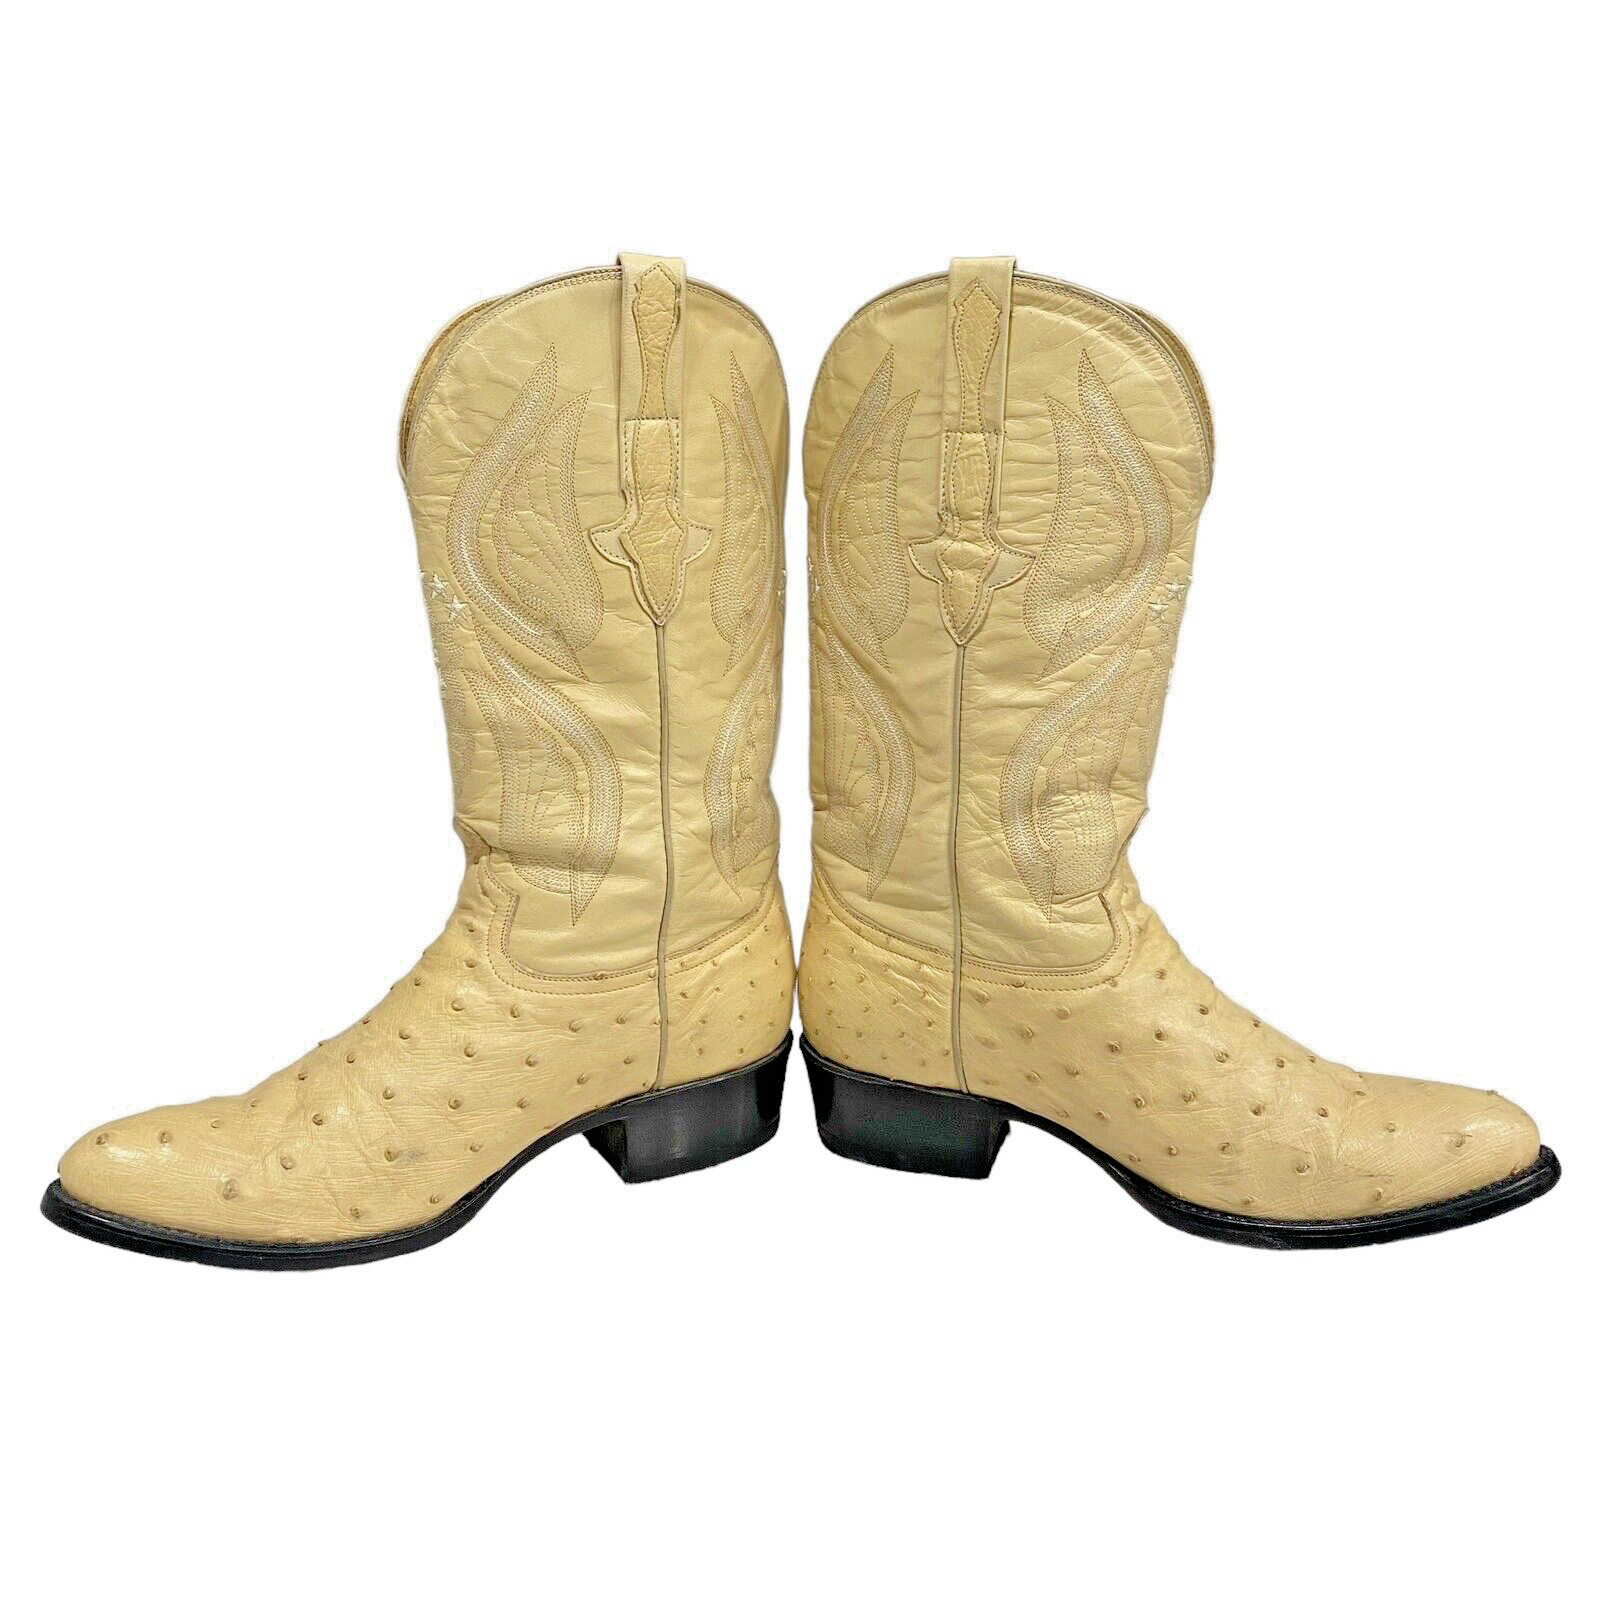 El General Cowboy Boots Mens 9.5 Cream Leather Ostrich Embossed